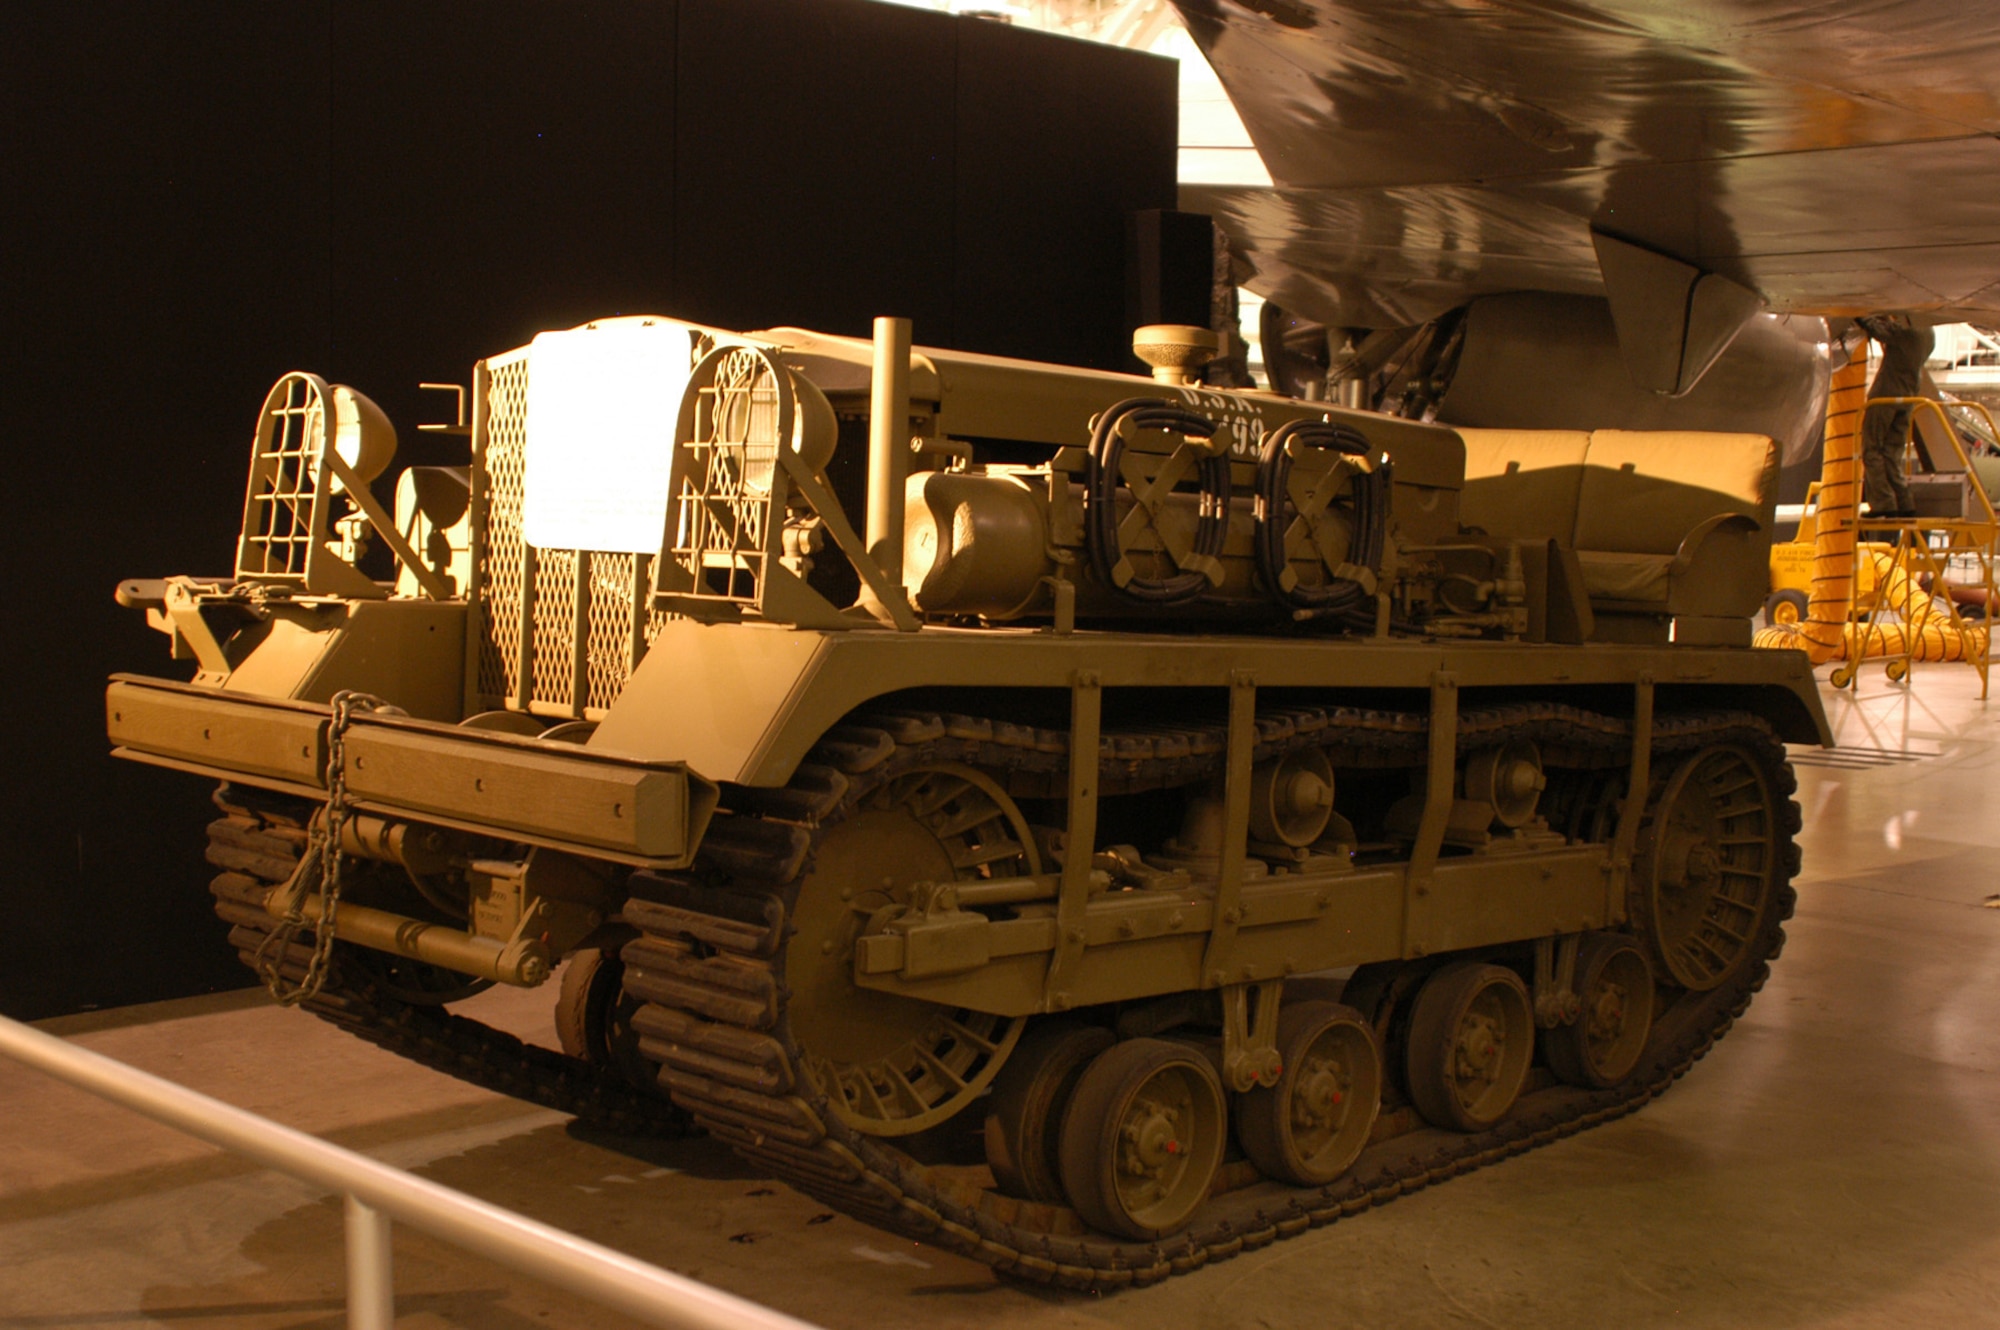 DAYTON, Ohio - Cleveland Tractor Co. Medium M2 Tractor on display at the National Museum of the U.S. Air Force. (U.S. Air Force photo)